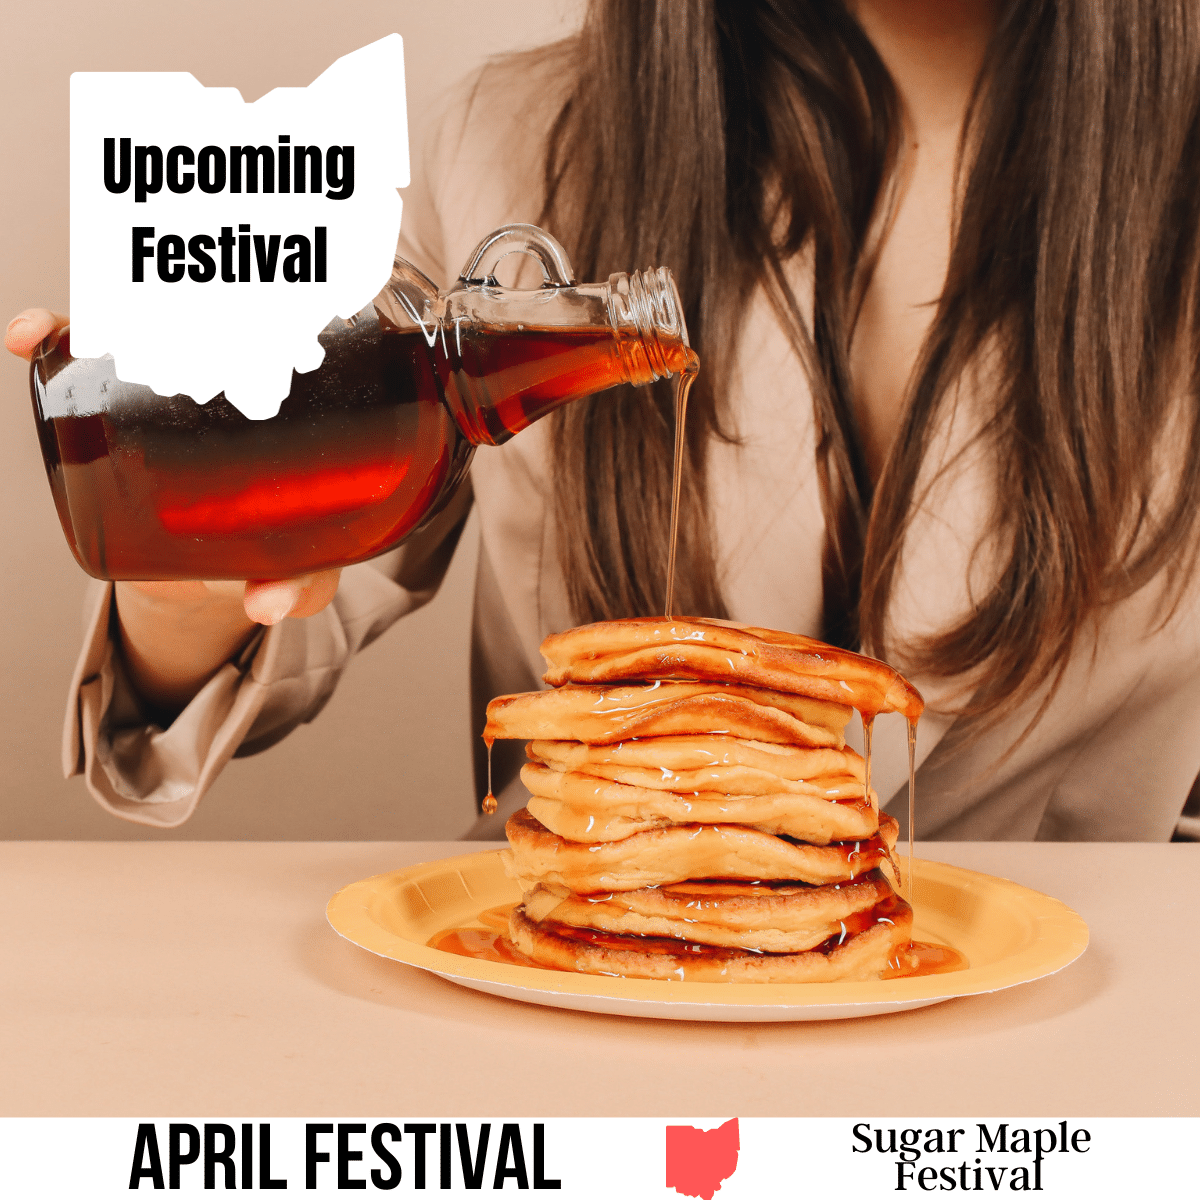 A square image of a photo of a person with long brown hair pouring maple syrup onto a large stack of pancakes. A white image of Ohio has text Upcoming Festival. A white strip across the bottom has text April Festival Sugar Maple Festival.